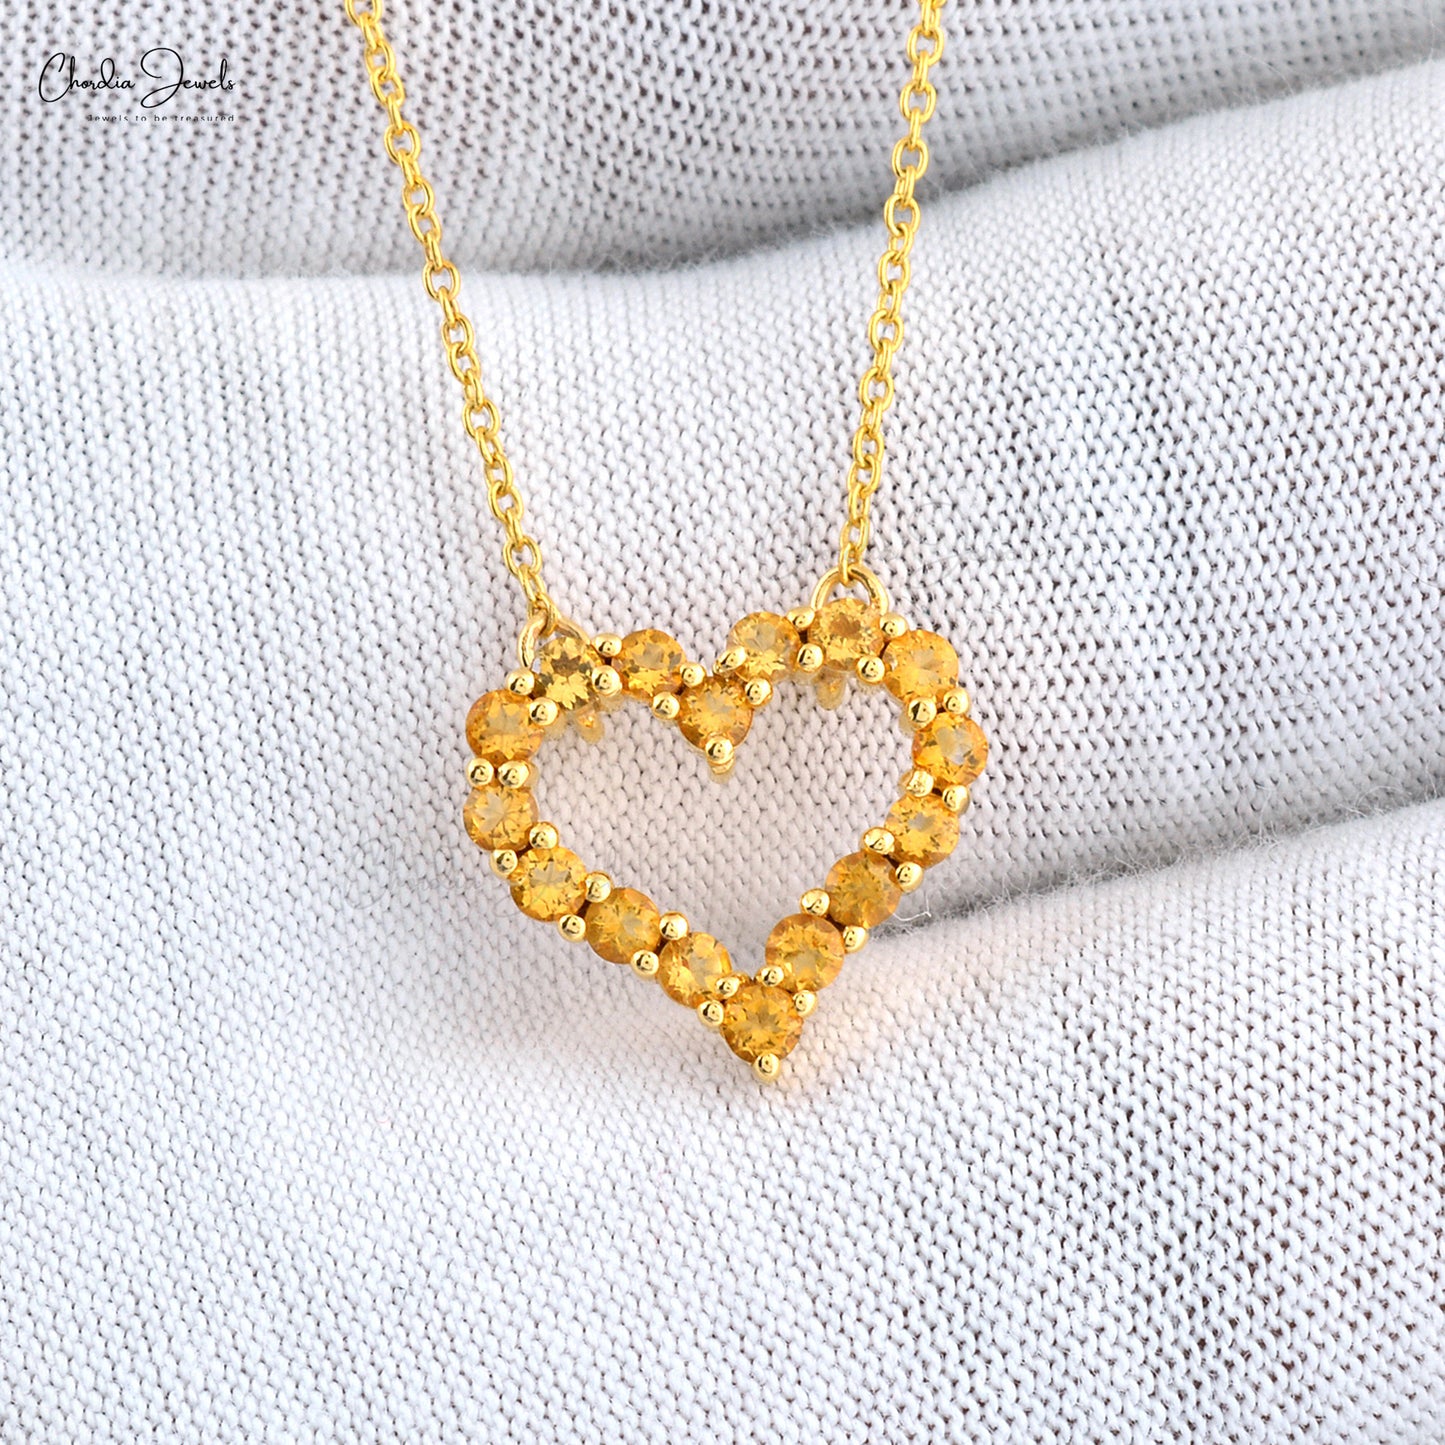 Load image into Gallery viewer, Heart Shaped Natural Citrine Necklace Pendant For Women Unique Style Gemstone Pendant Real 14k Yellow Gold Jewelry Gift For Love
